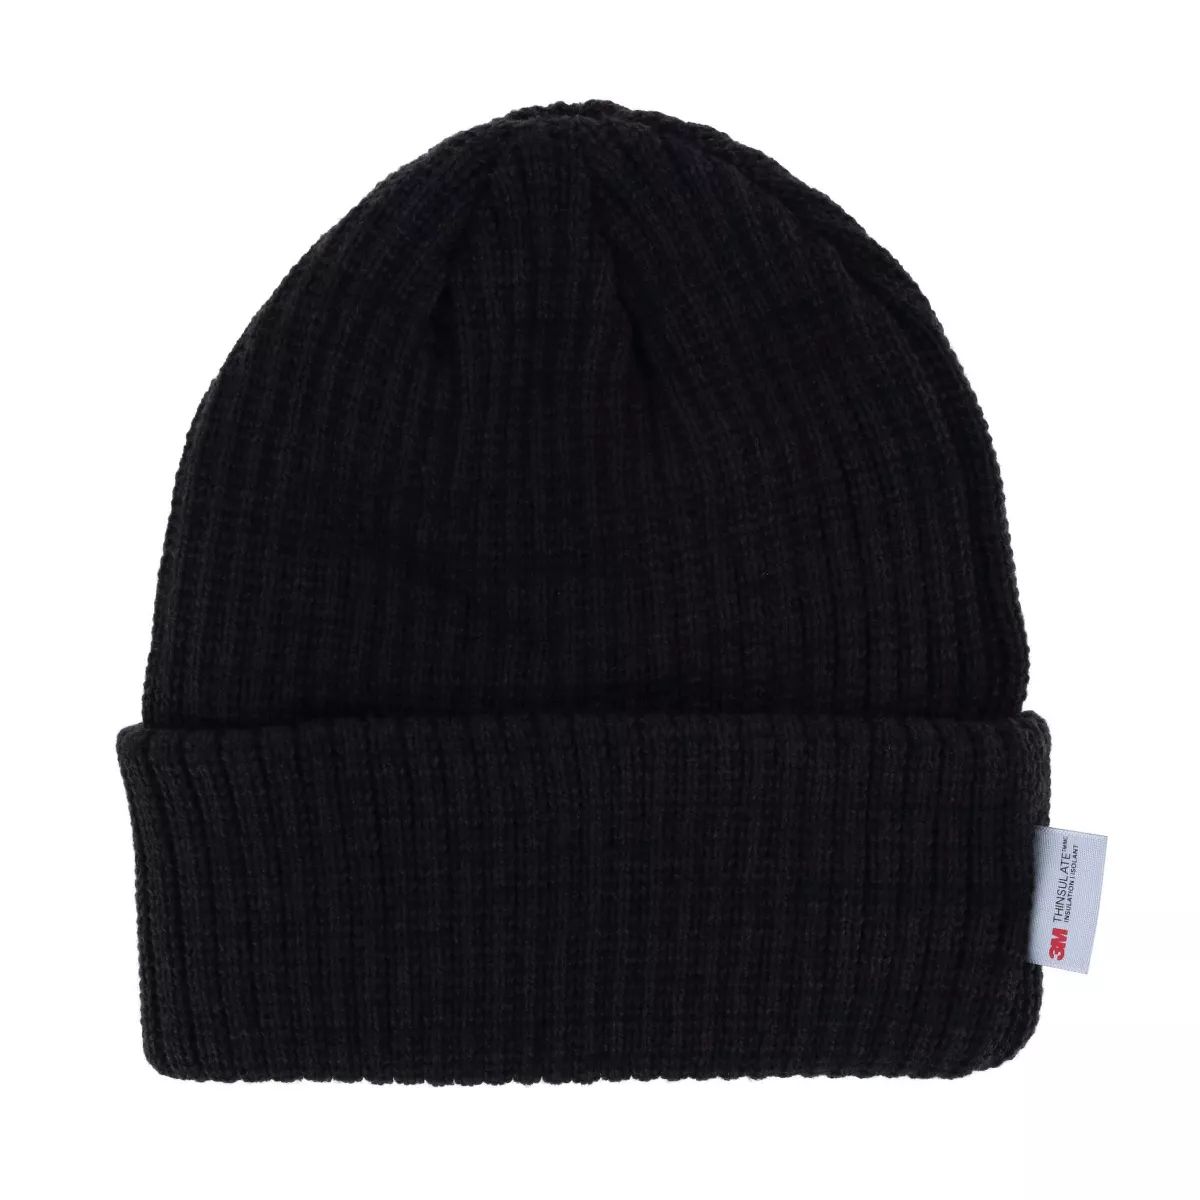 CTM Men's Thinsulate Lined Knit Winter Beanie Hat | Target